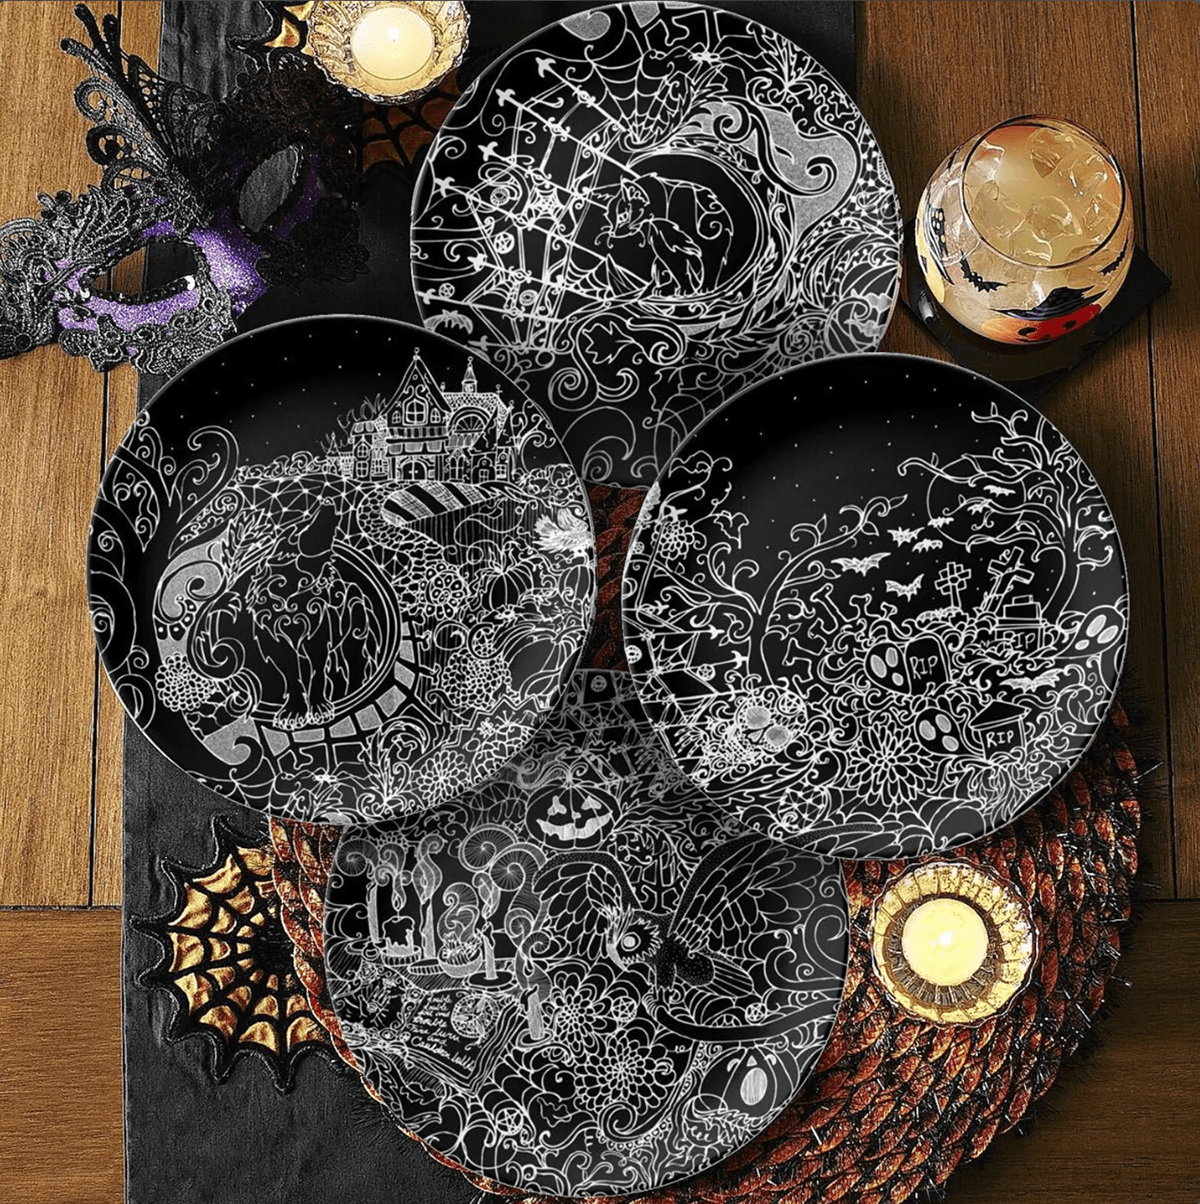 dinnerware fabric fine china Halloween home decor surface design surface pattern design tabletop tableware Witches